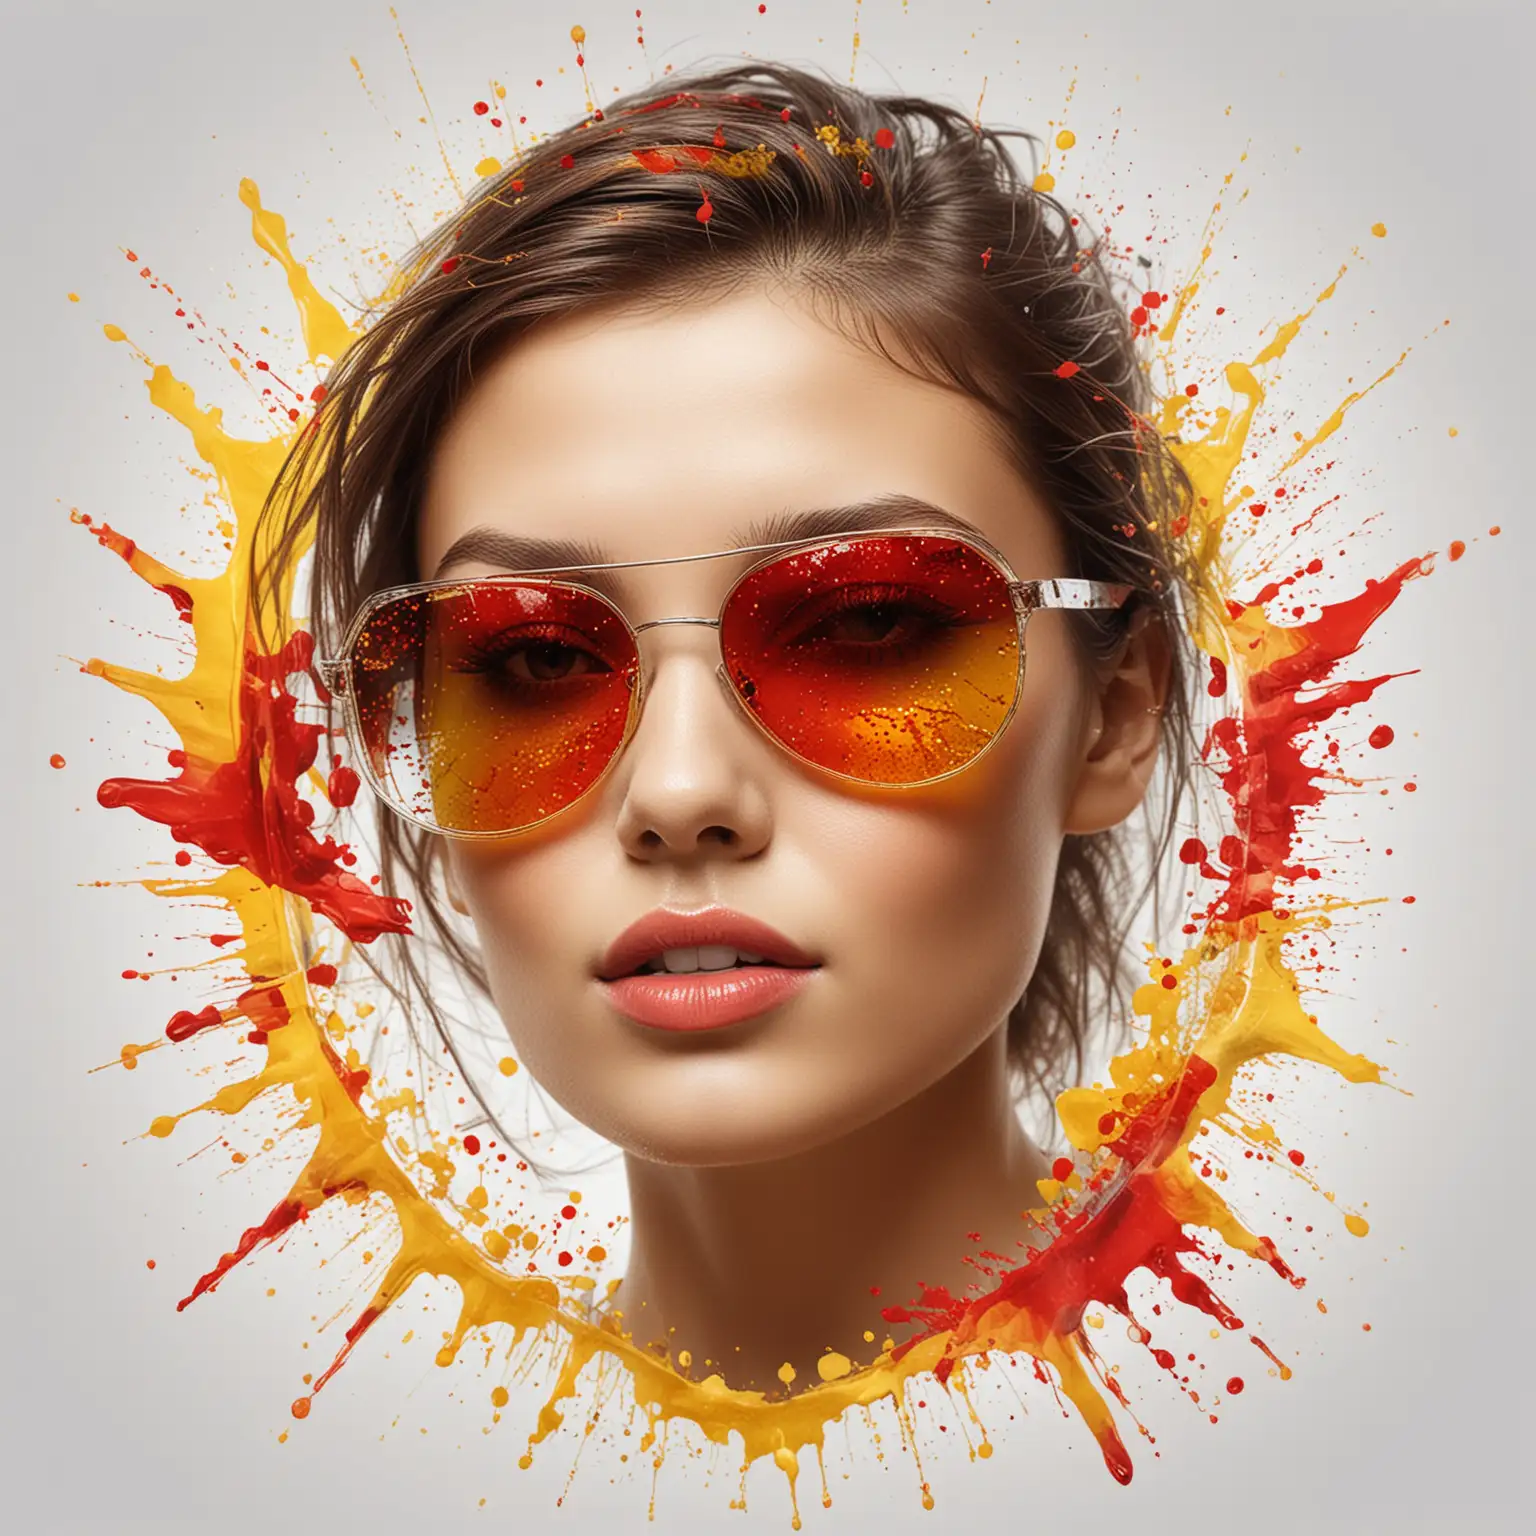 generate realistic professional design featuring an image of a beautiful woman wearing sunglasses splitted in glass pieces. add red and yellow ink splash and lines over the design and texture. use white blank background.